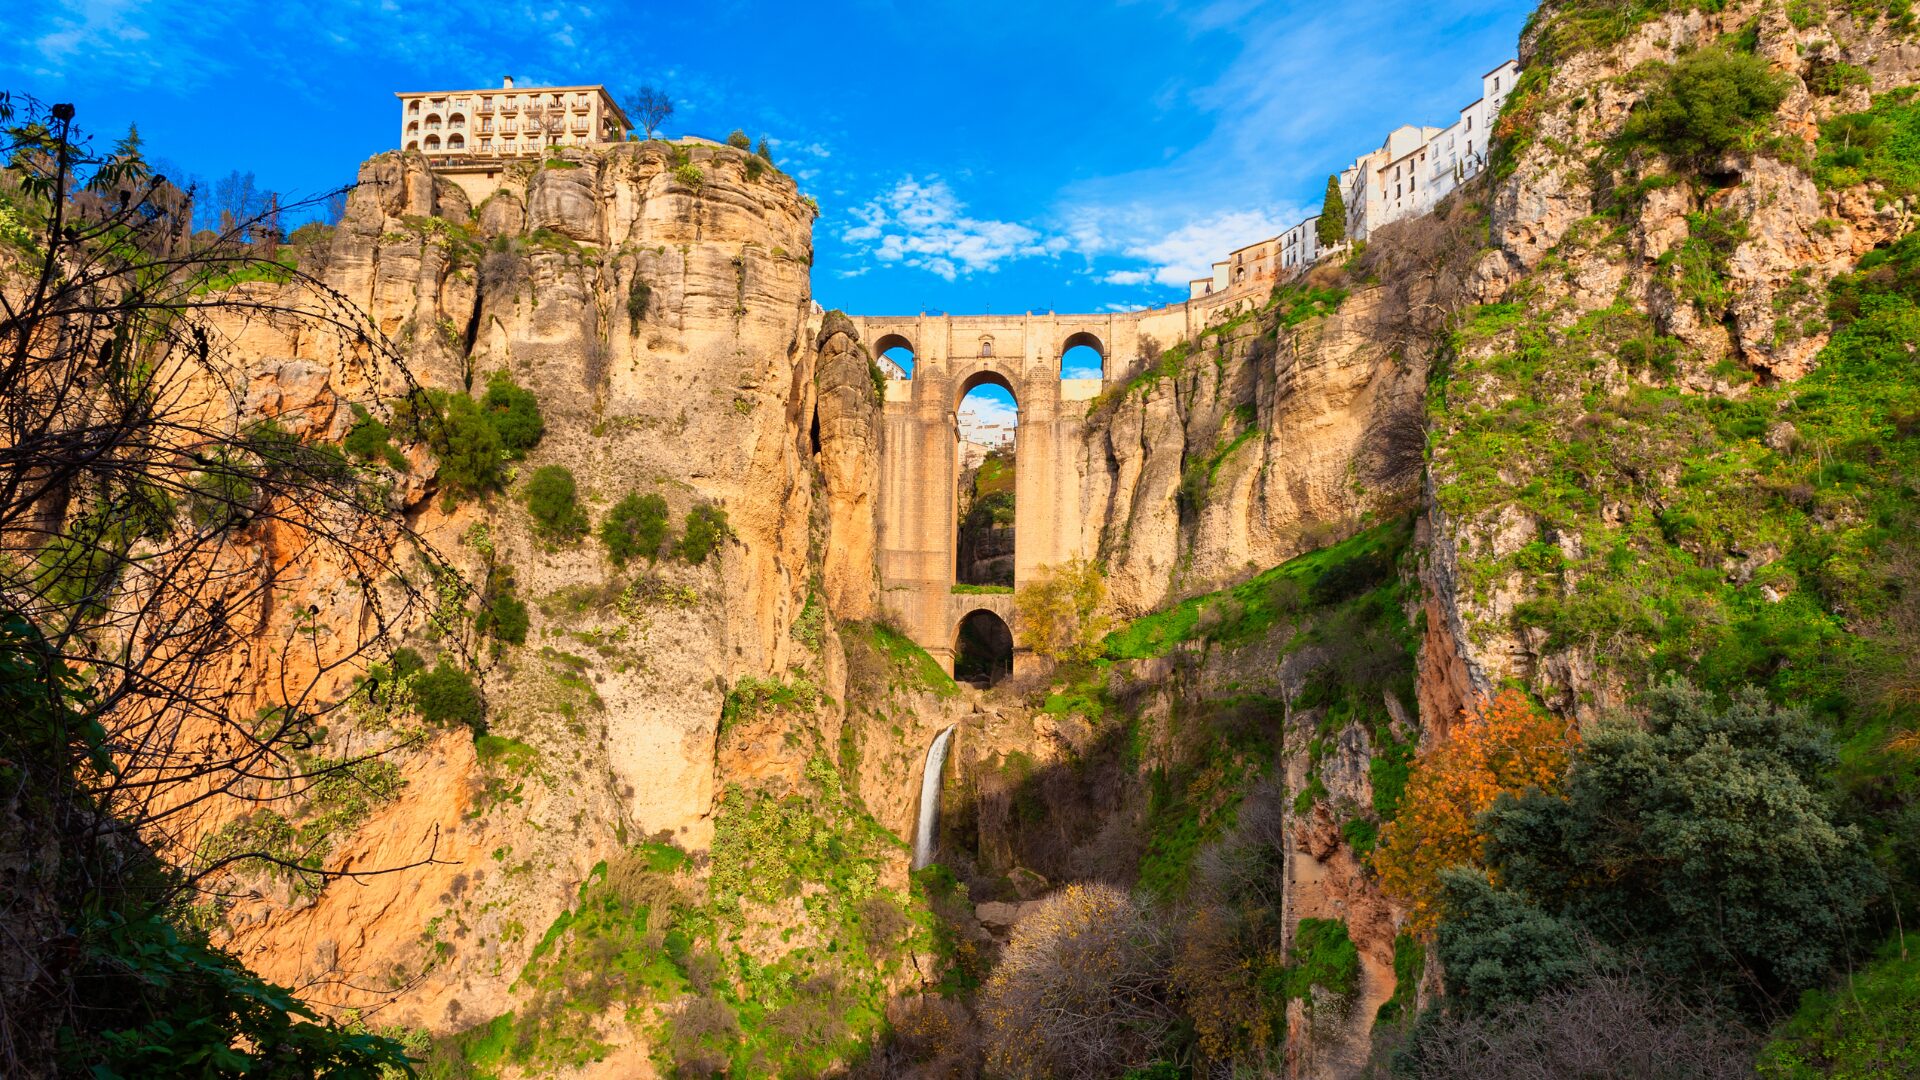 An image of Ronda, Spain.